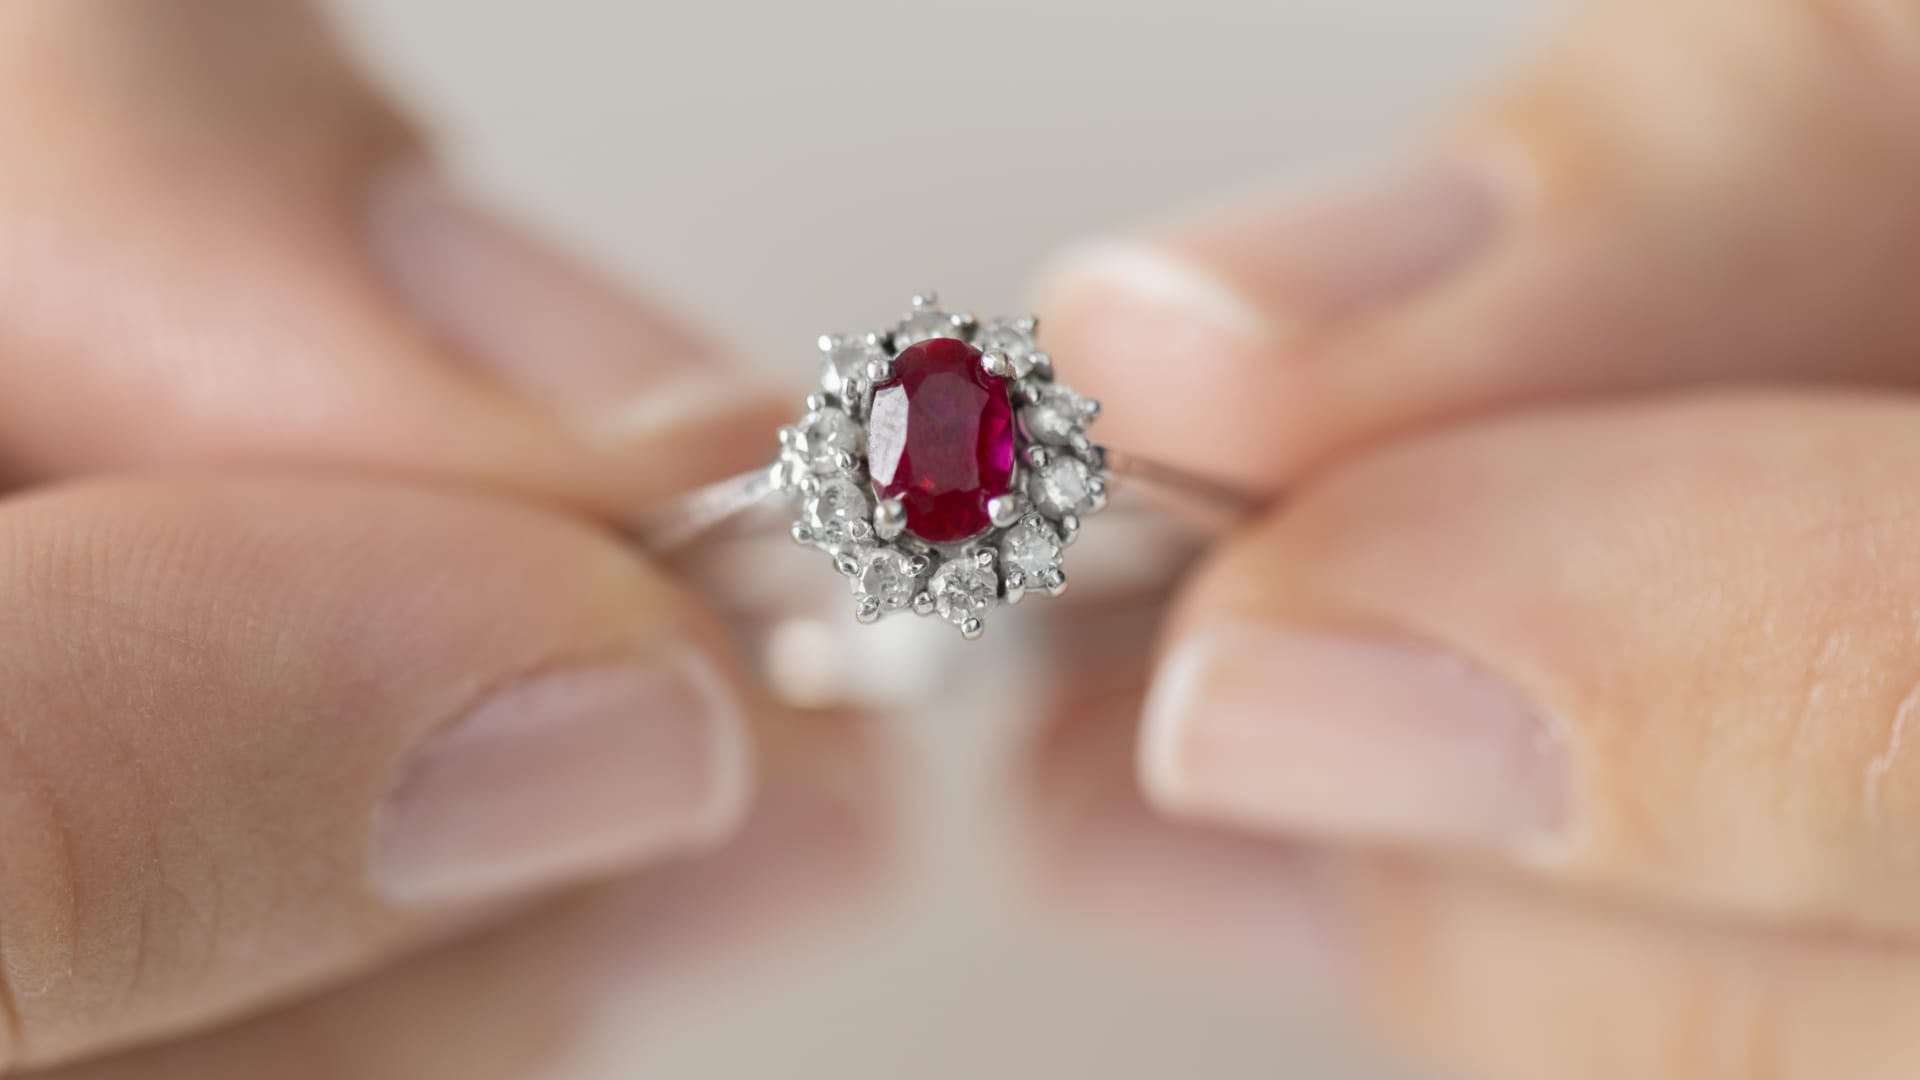 Done with diamonds? Gemstone engagement rings are capturing hearts and market share